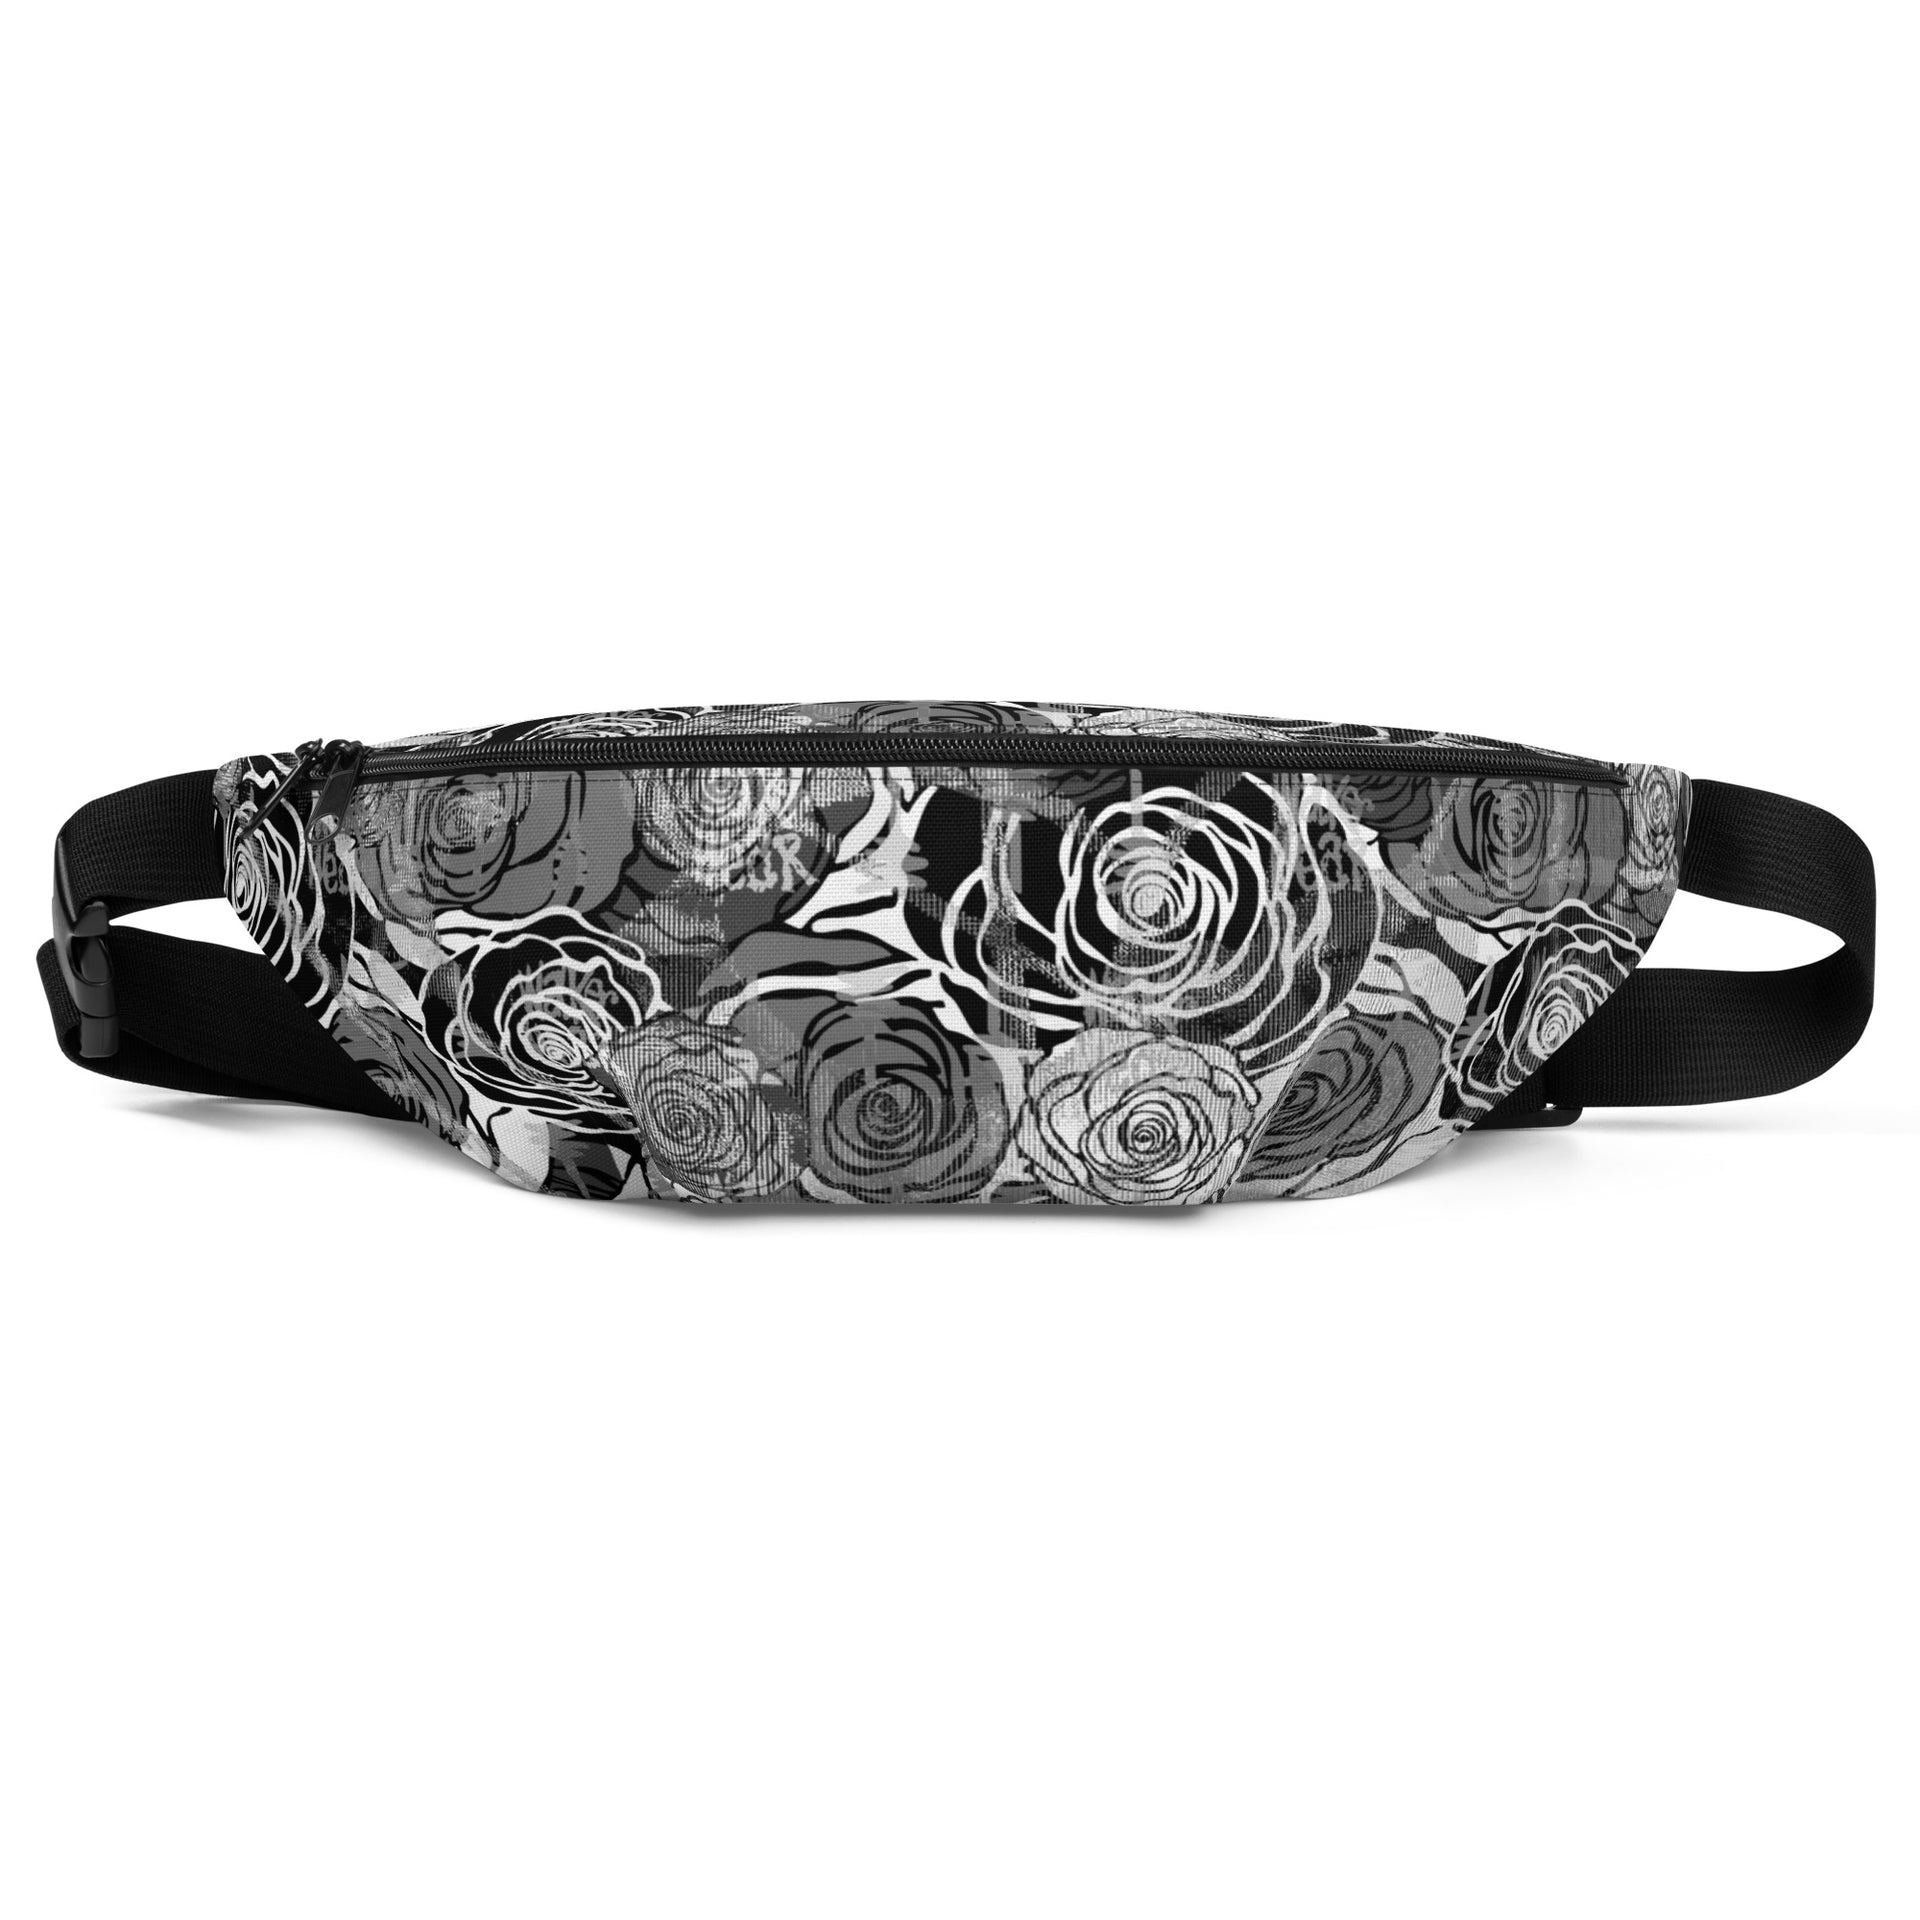 Rose Gothic Print Fanny Pack Waist Bag Zippered Pocket With Adjustable Belt  Waist Pack For Hiking Running Travel And Casual, Black, One Size :  : Sports & Outdoors